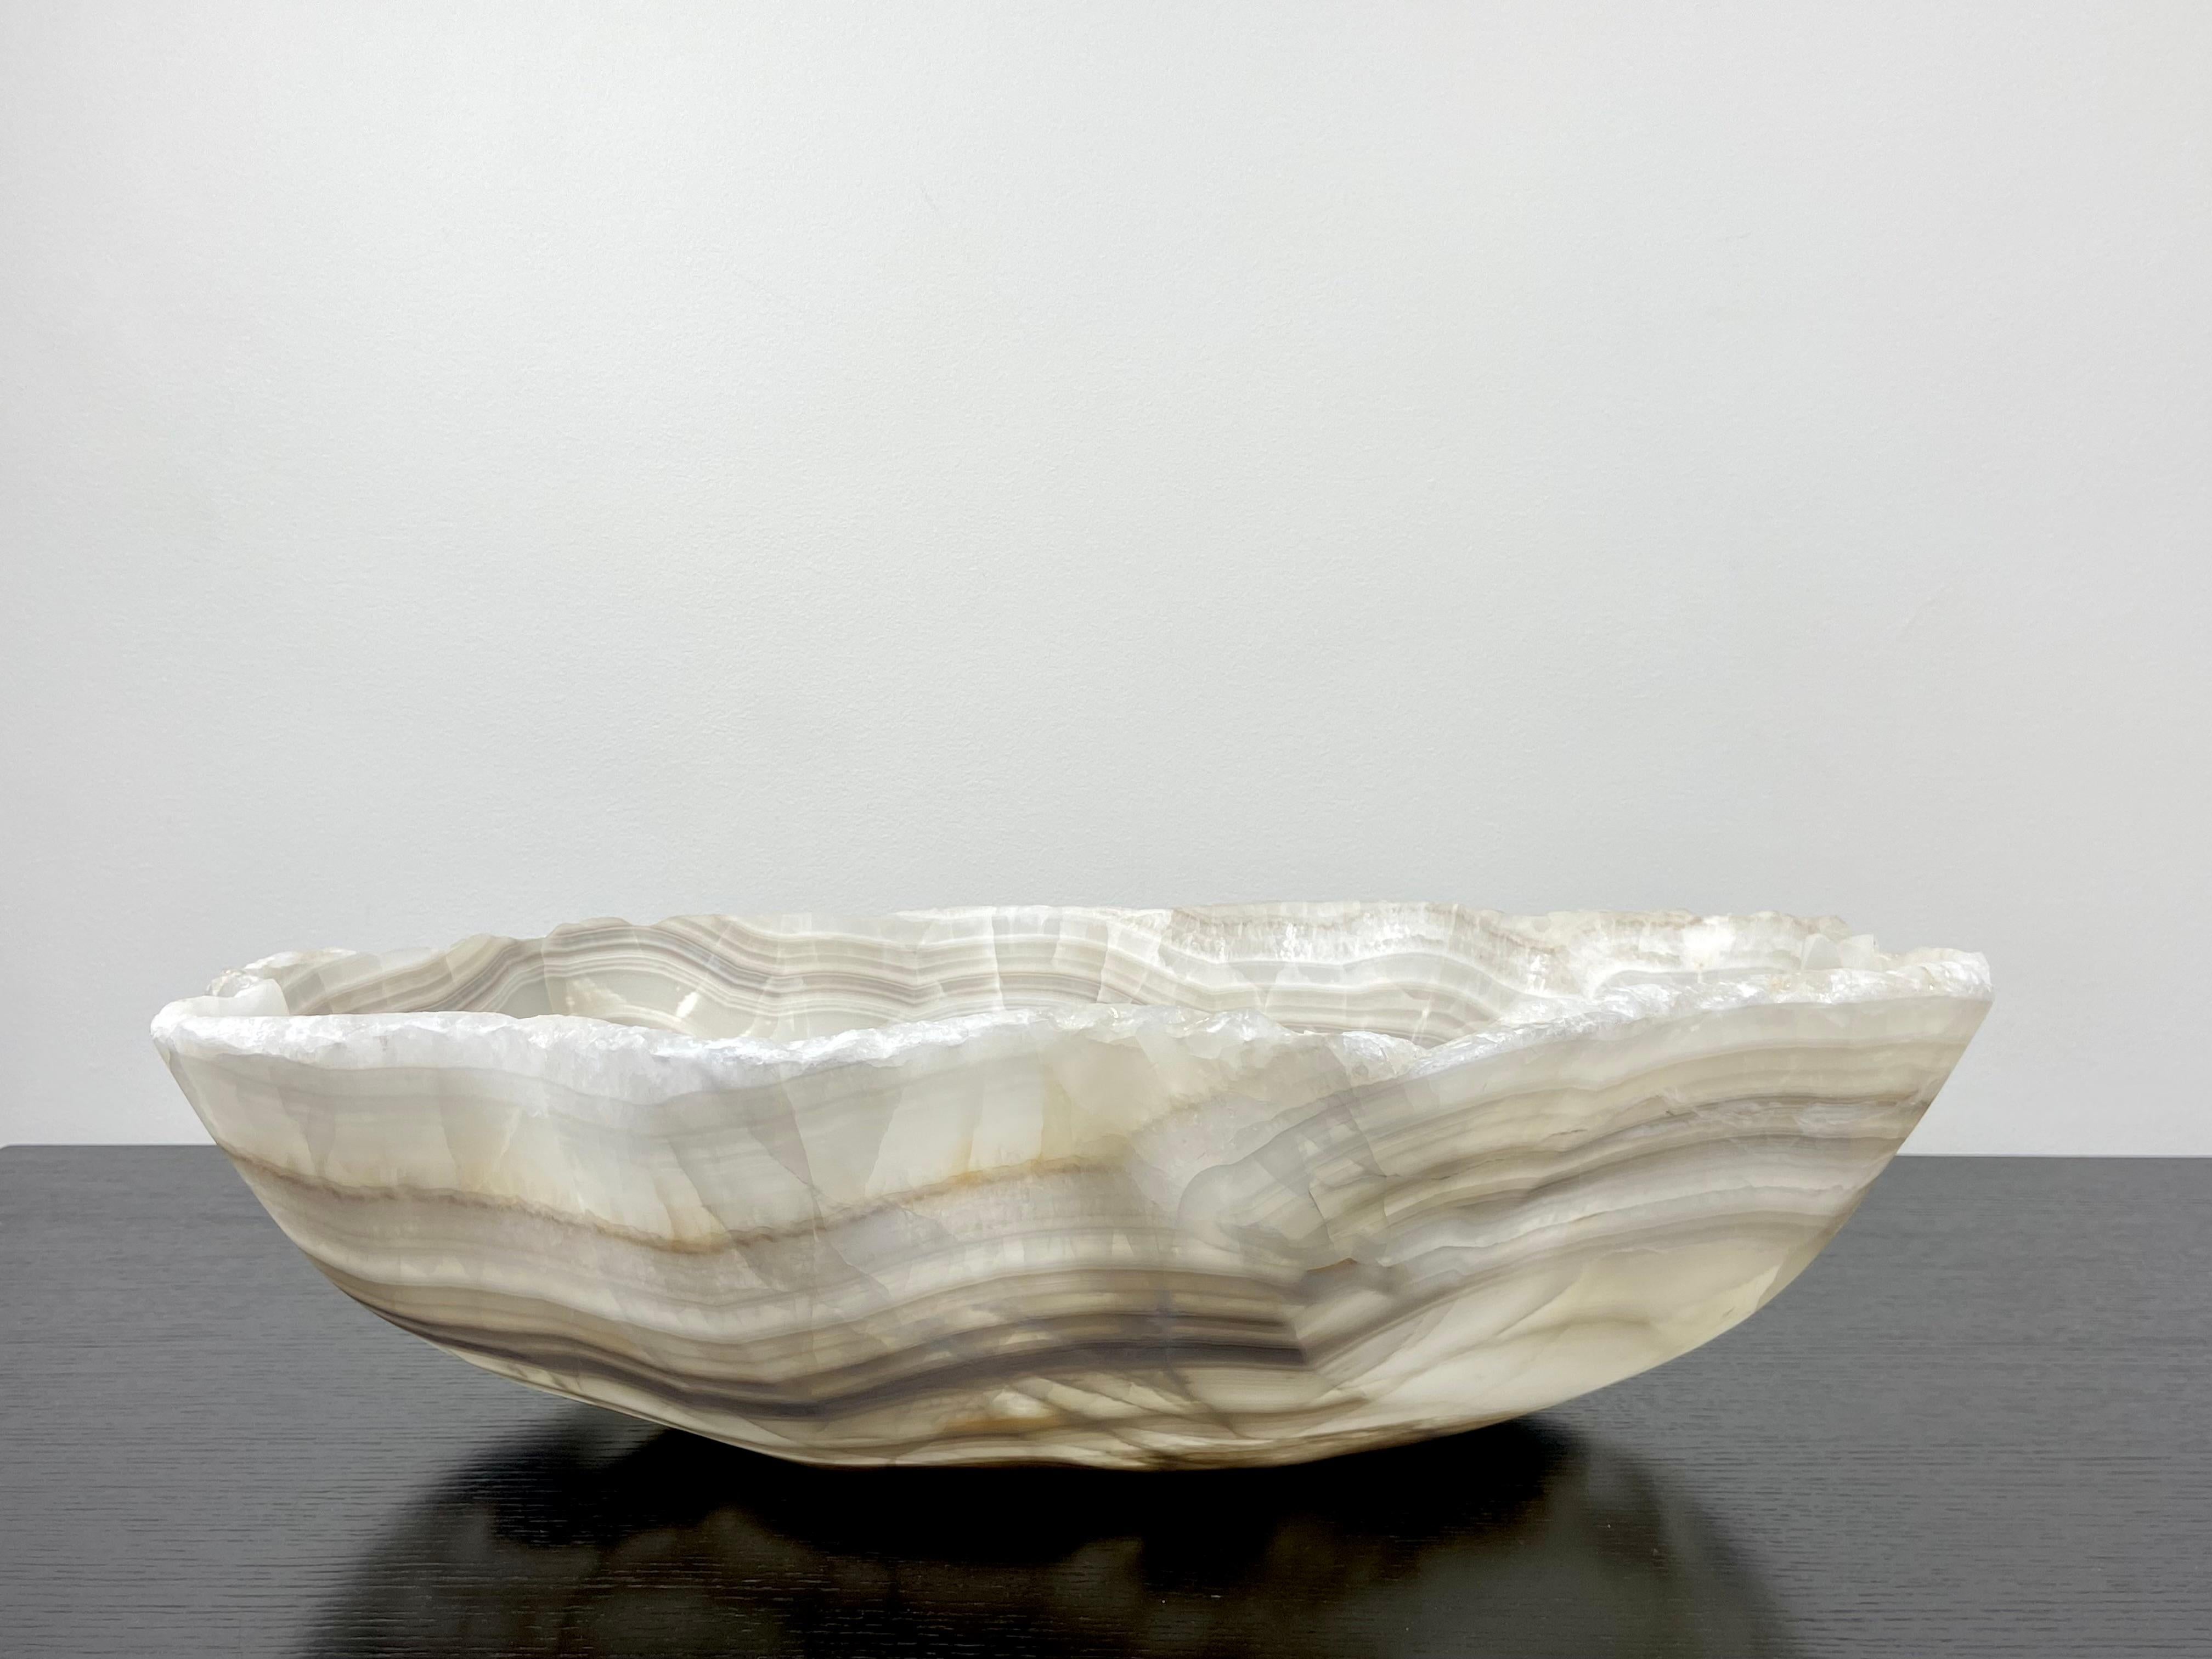 An extra large onyx bowl with banded stripes of grey and white. This one of a kind organically oval decorative vessel is meticulously hand-carved from a single piece of onyx by skilled artists to reveal its' inherent characteristics like the